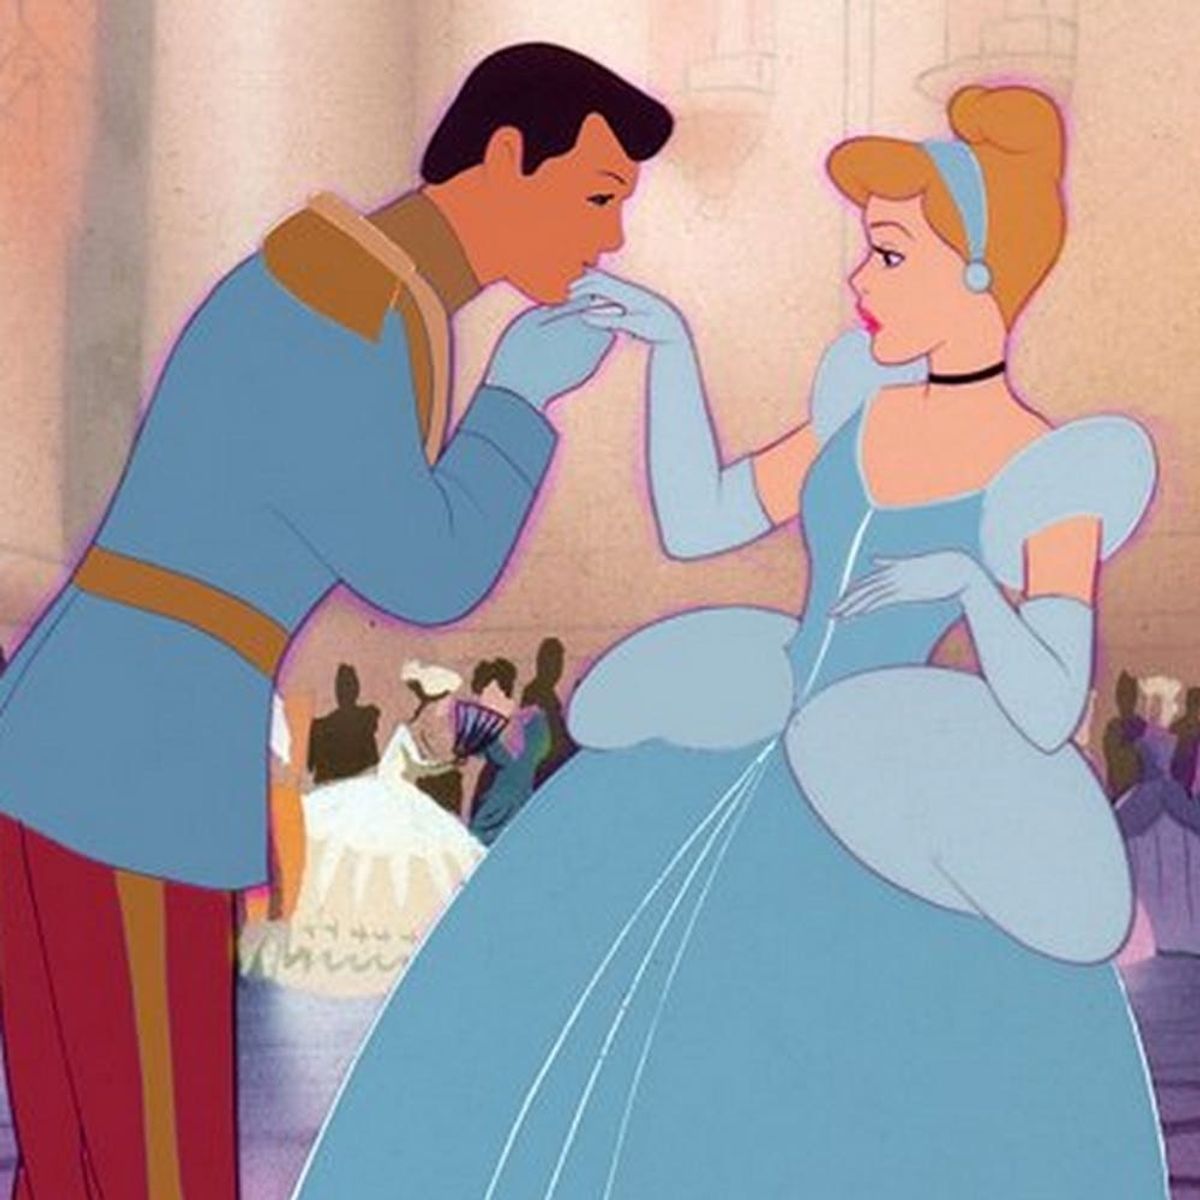 5 Celebrity Dudes Who *Should* Star in the New Prince Charming Disney Movie